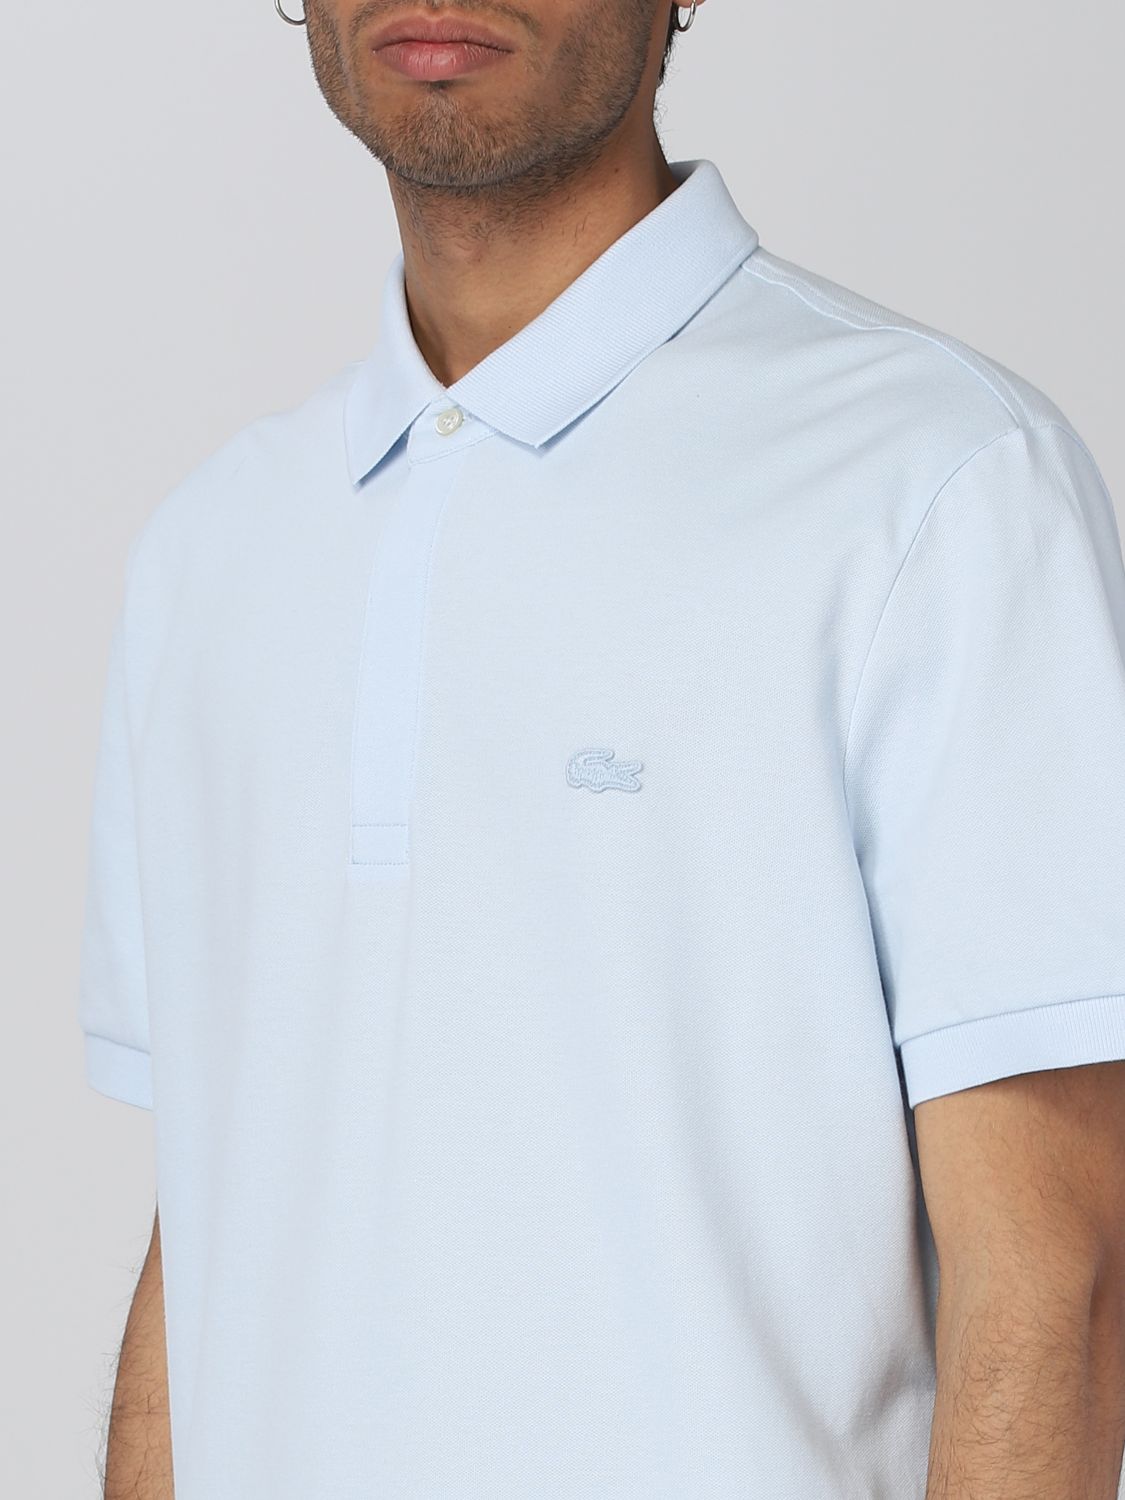 LACOSTE: polo for man - Sky | Lacoste polo shirt PH5522 online GIGLIO.COM